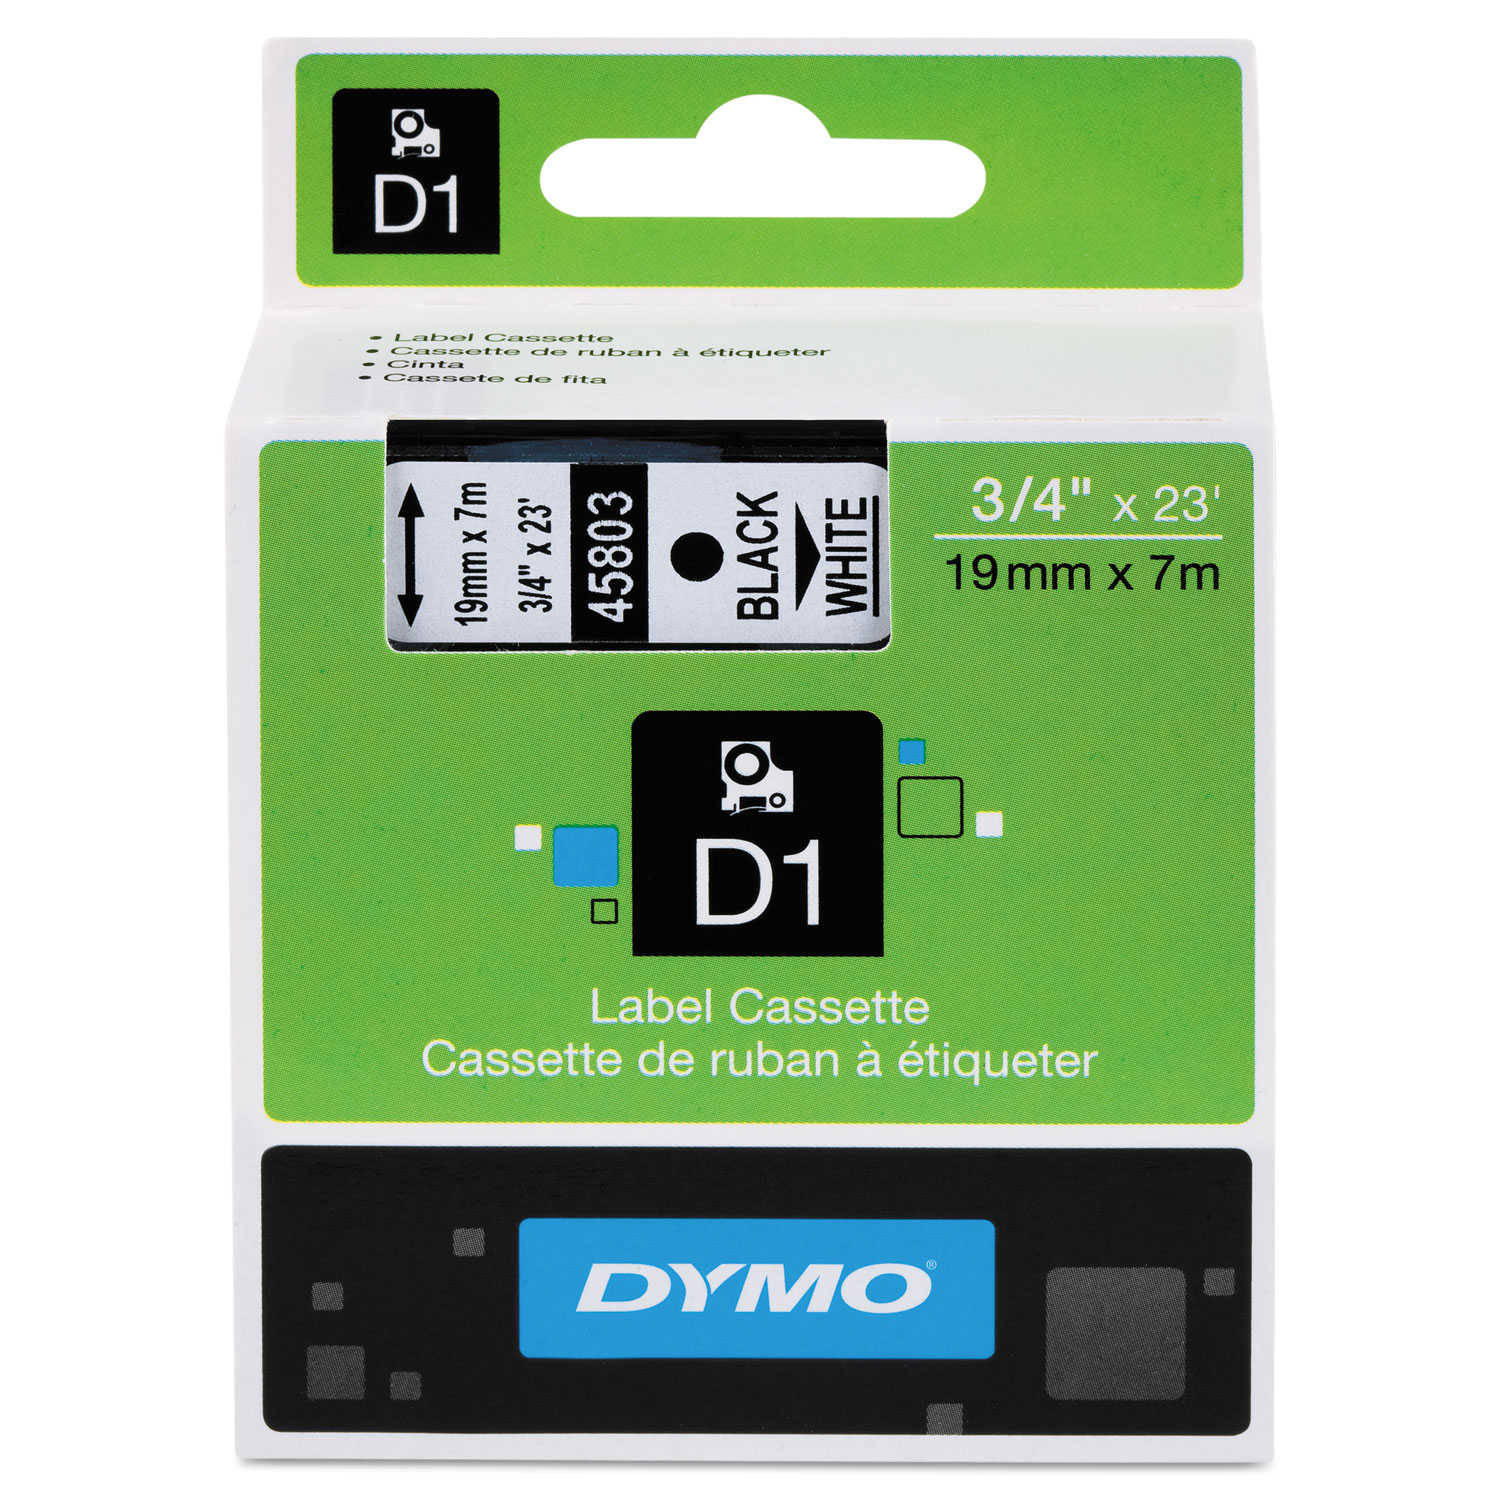 DYMO DYM45803 D1 High-Performance Polyester Removable Label Tape, 3/4" x 23 ft, Black on White